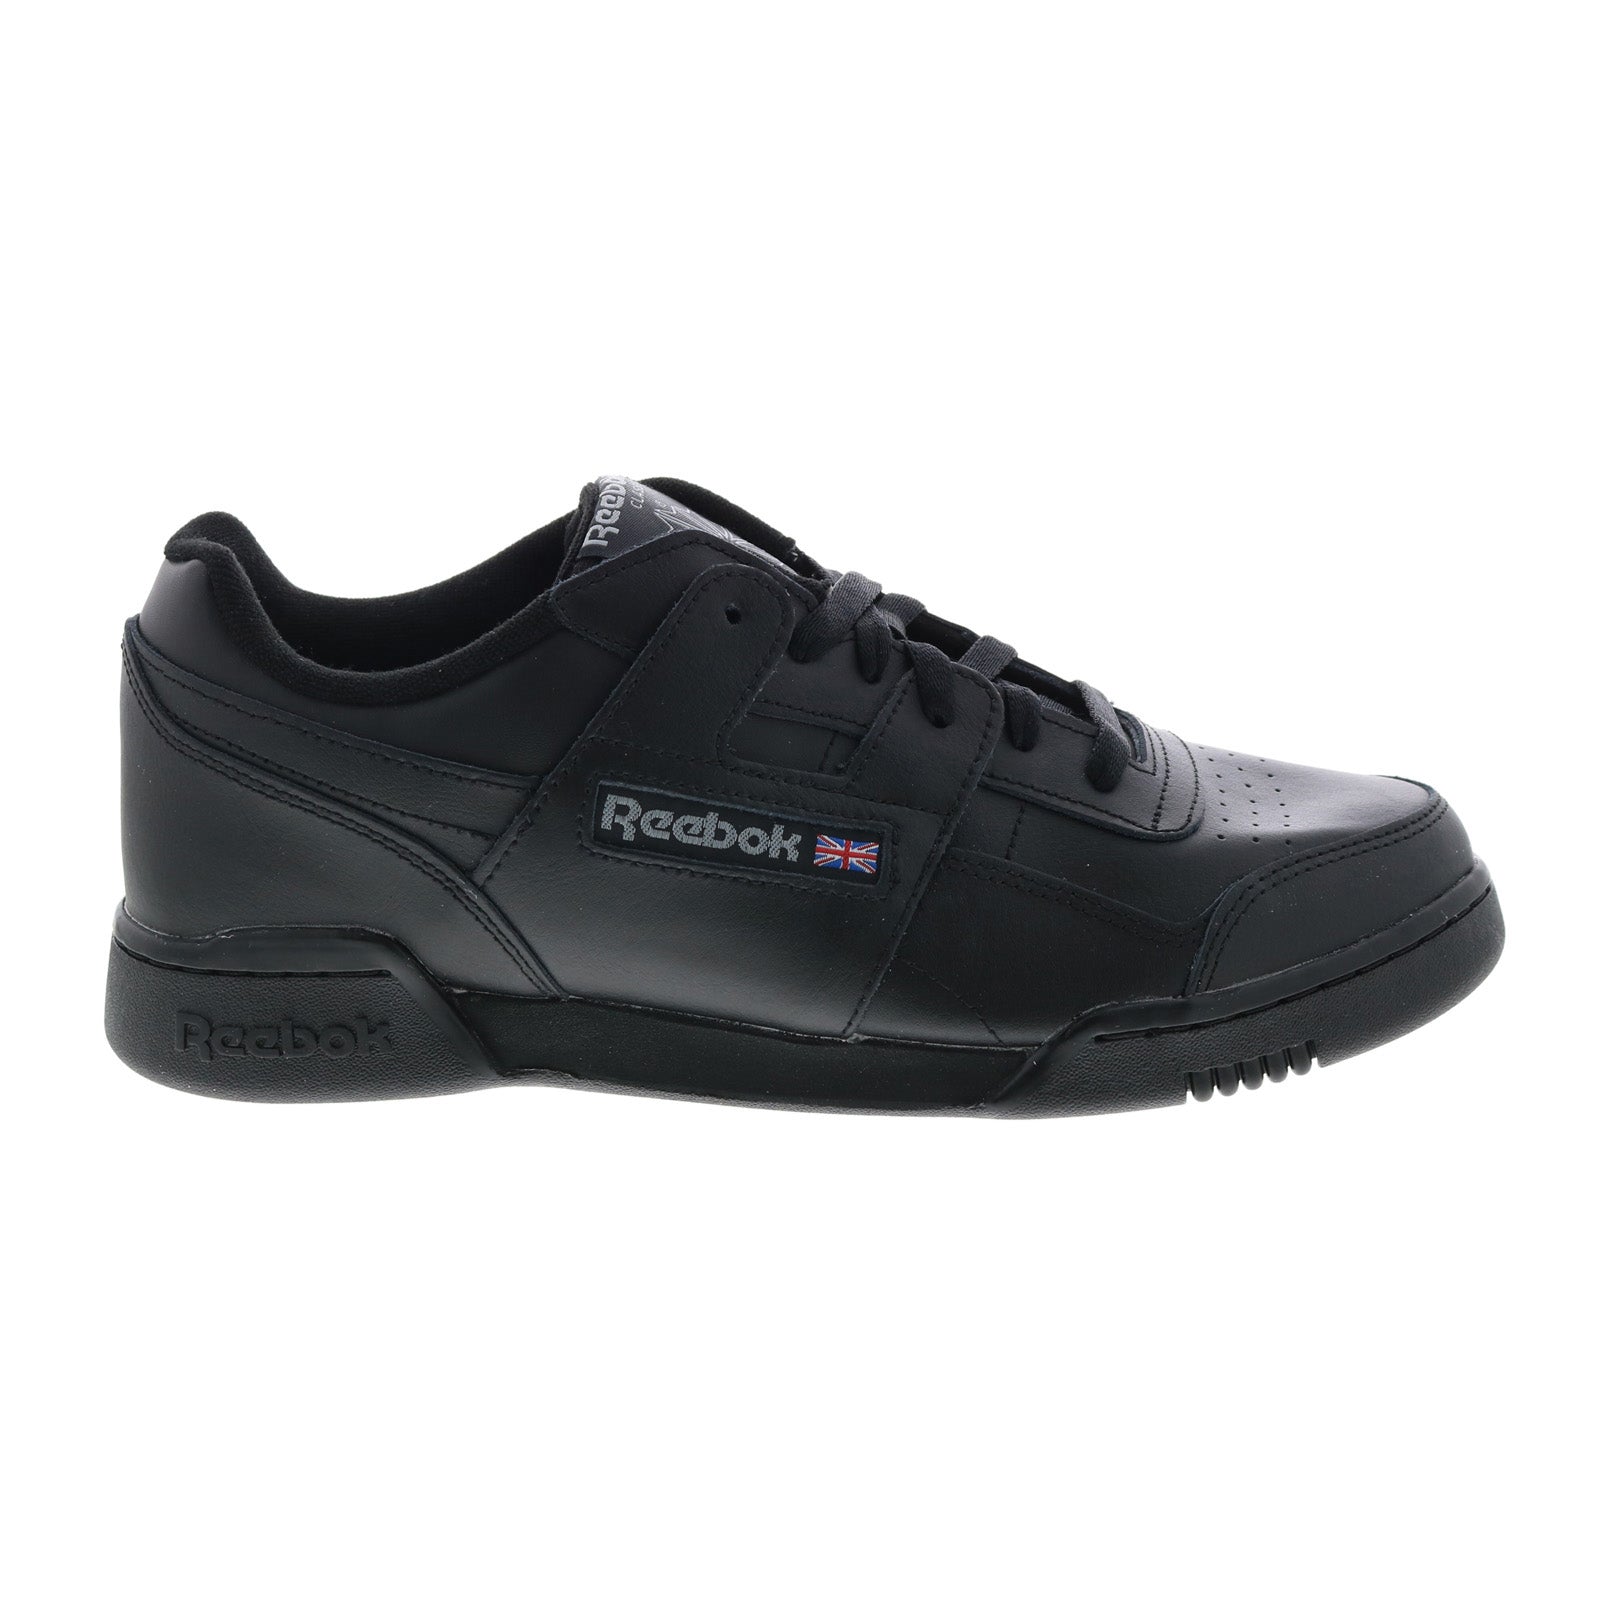 achtergrond opstelling zwaan Reebok Workout Plus HP5910 Mens Black Leather Lifestyle Sneakers Shoes -  Ruze Shoes